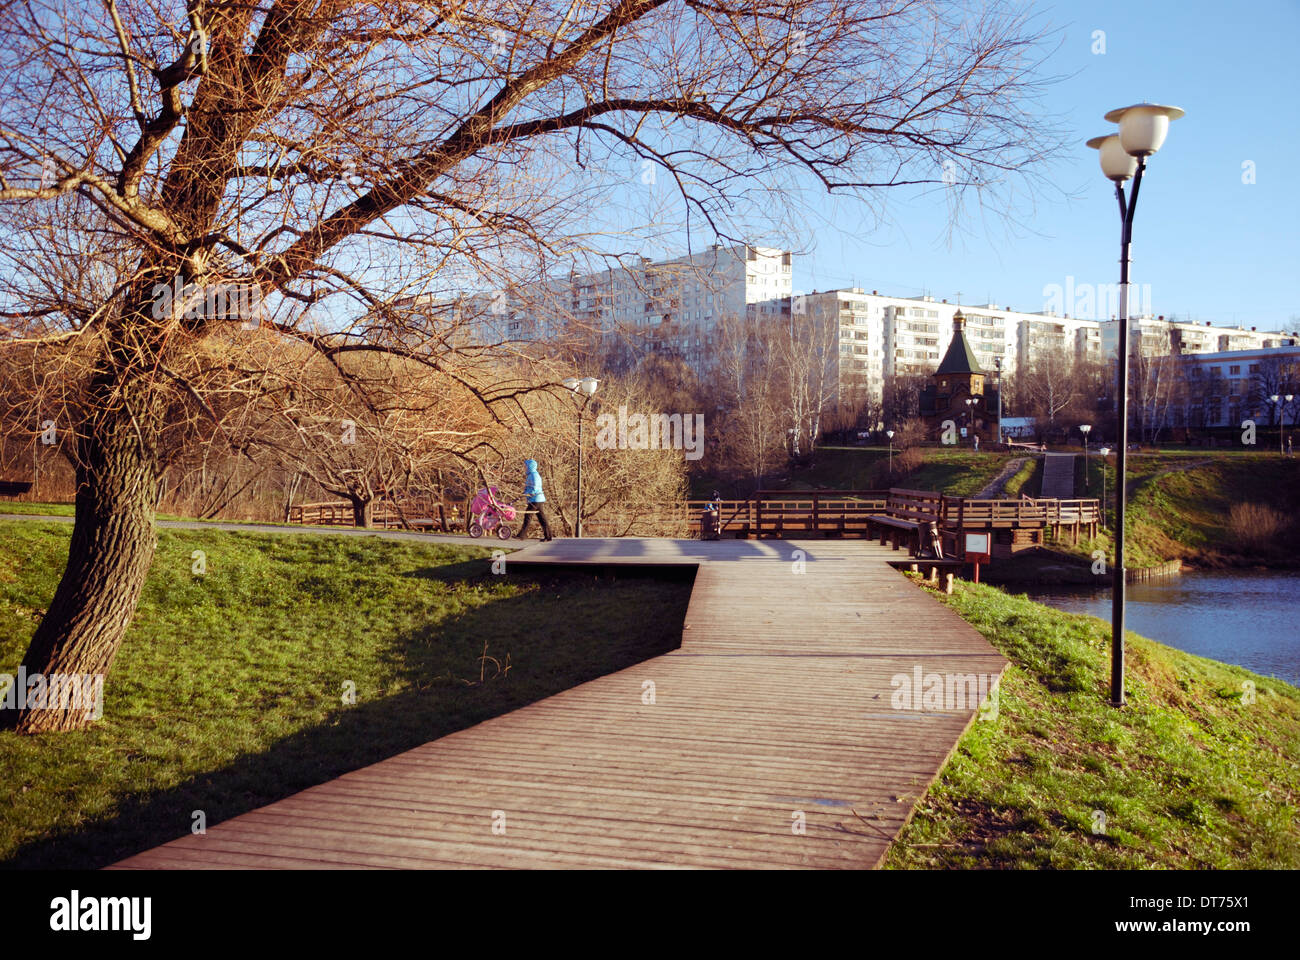 Urban scenery of a park in Moscow Russia Stock Photo